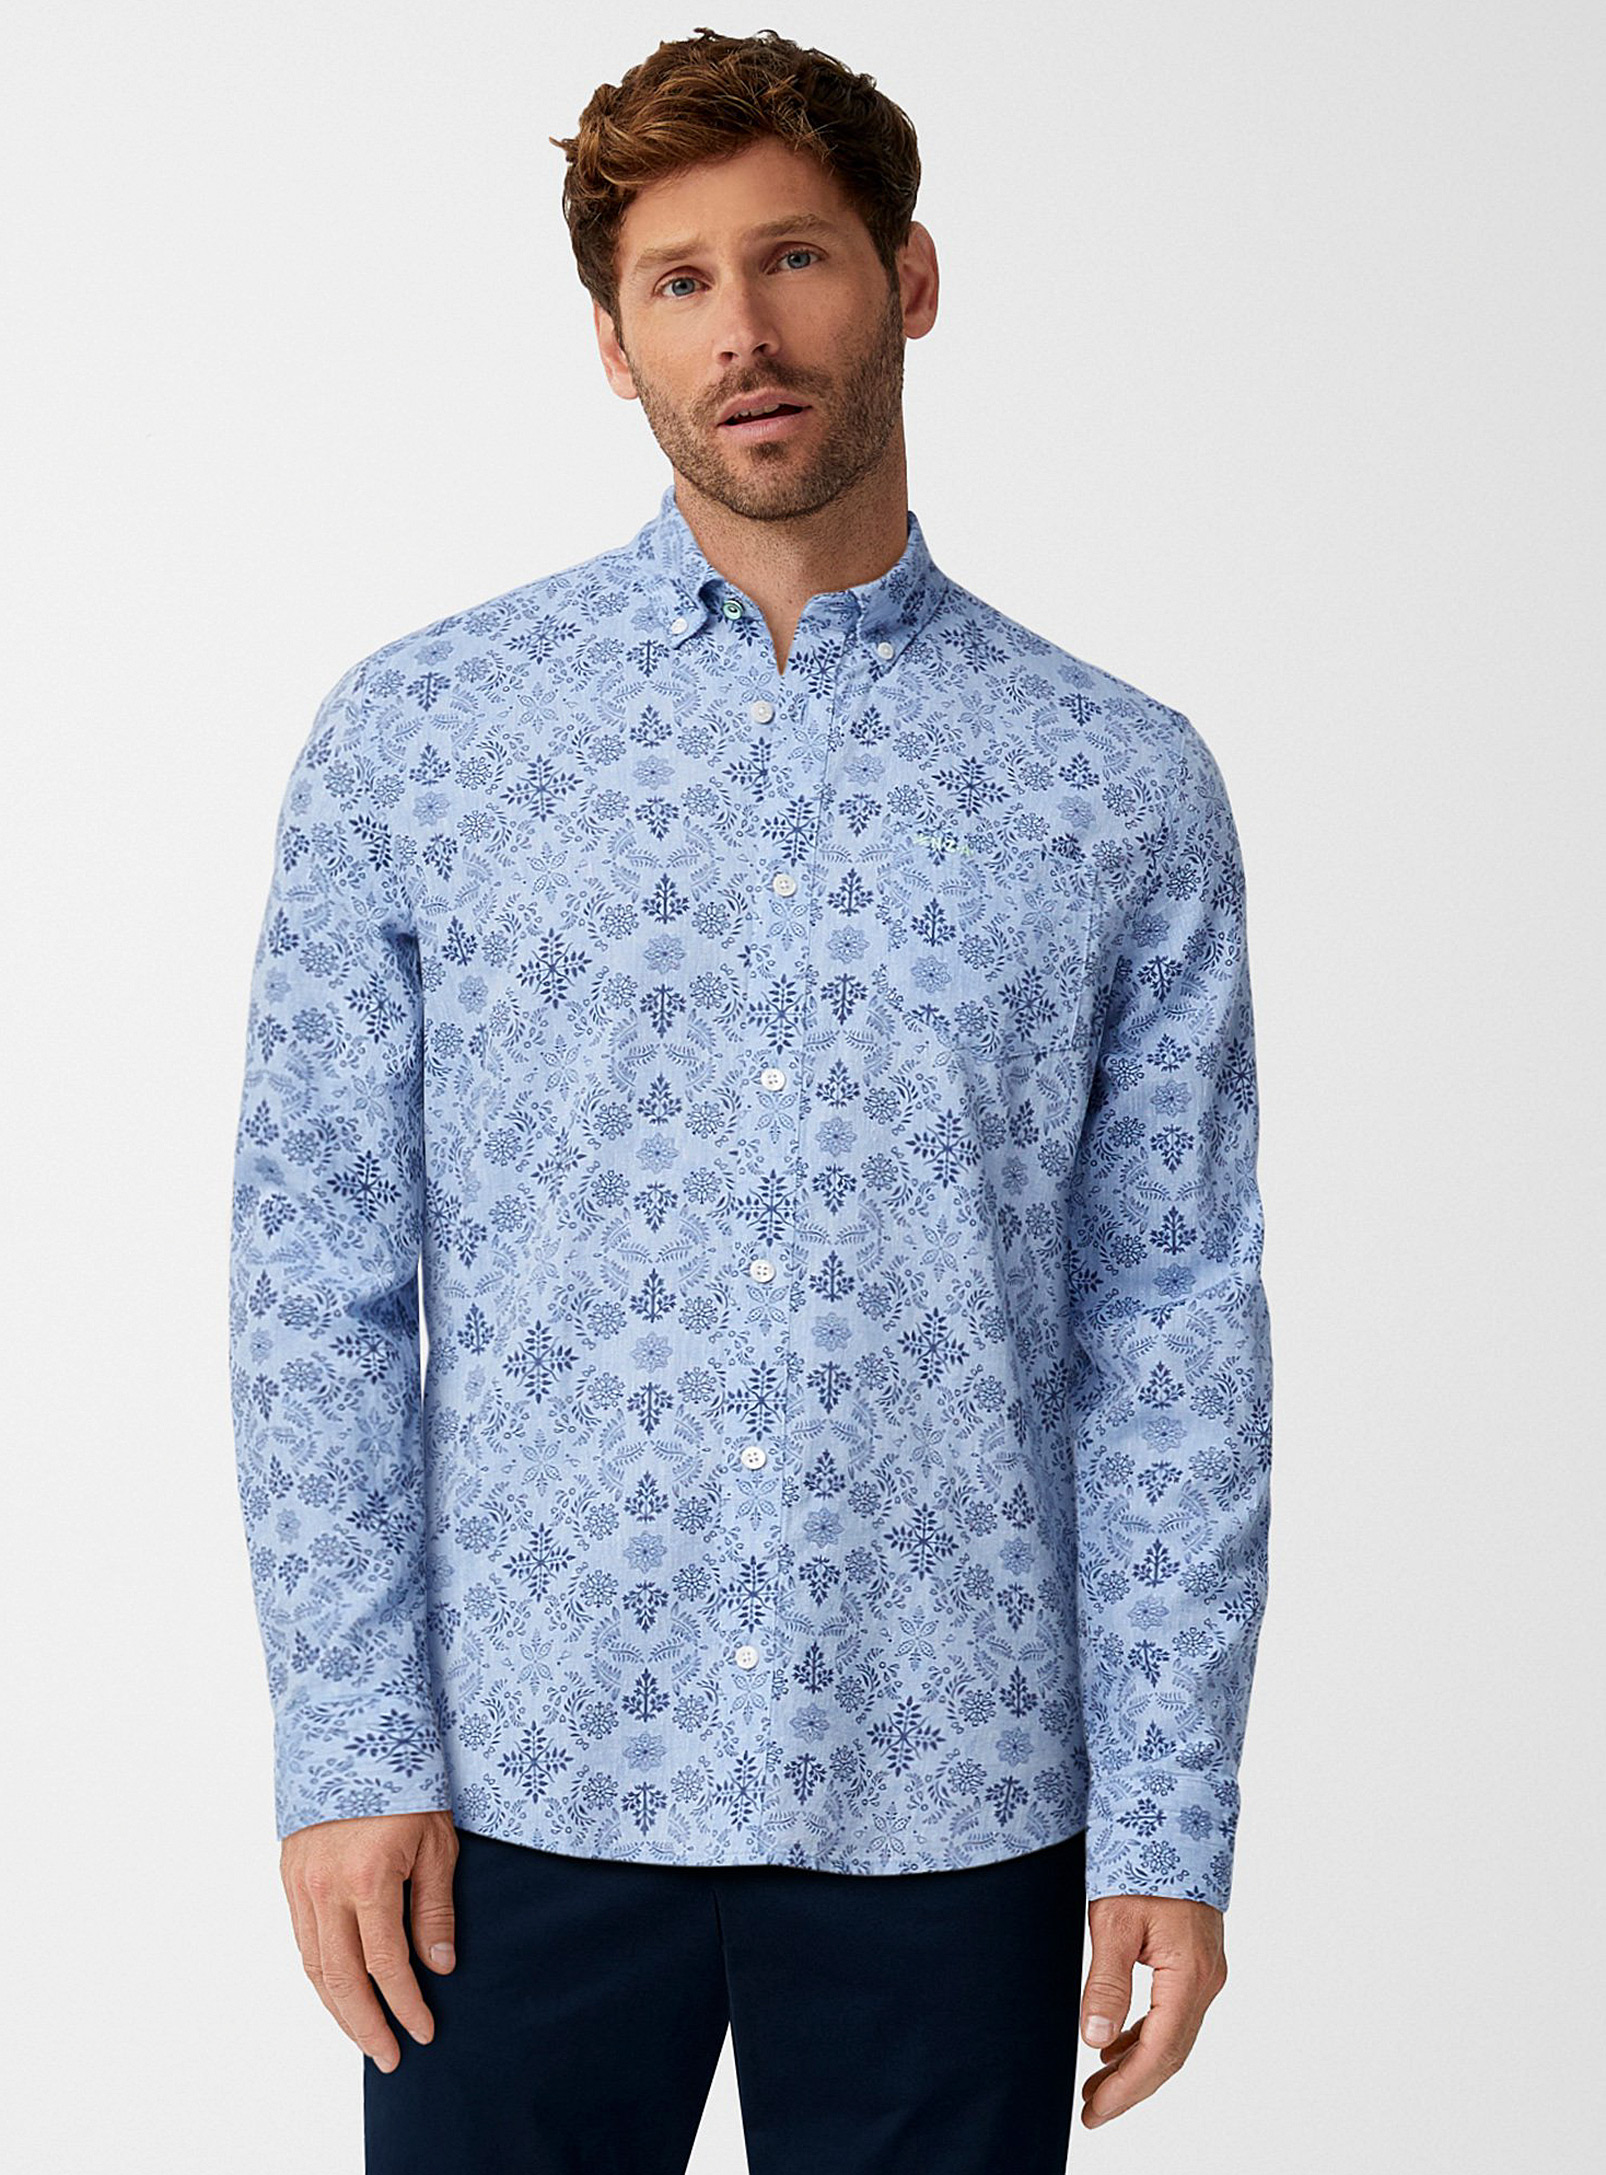 New Zealand Auckland - Men's Chambray-like floral shirt